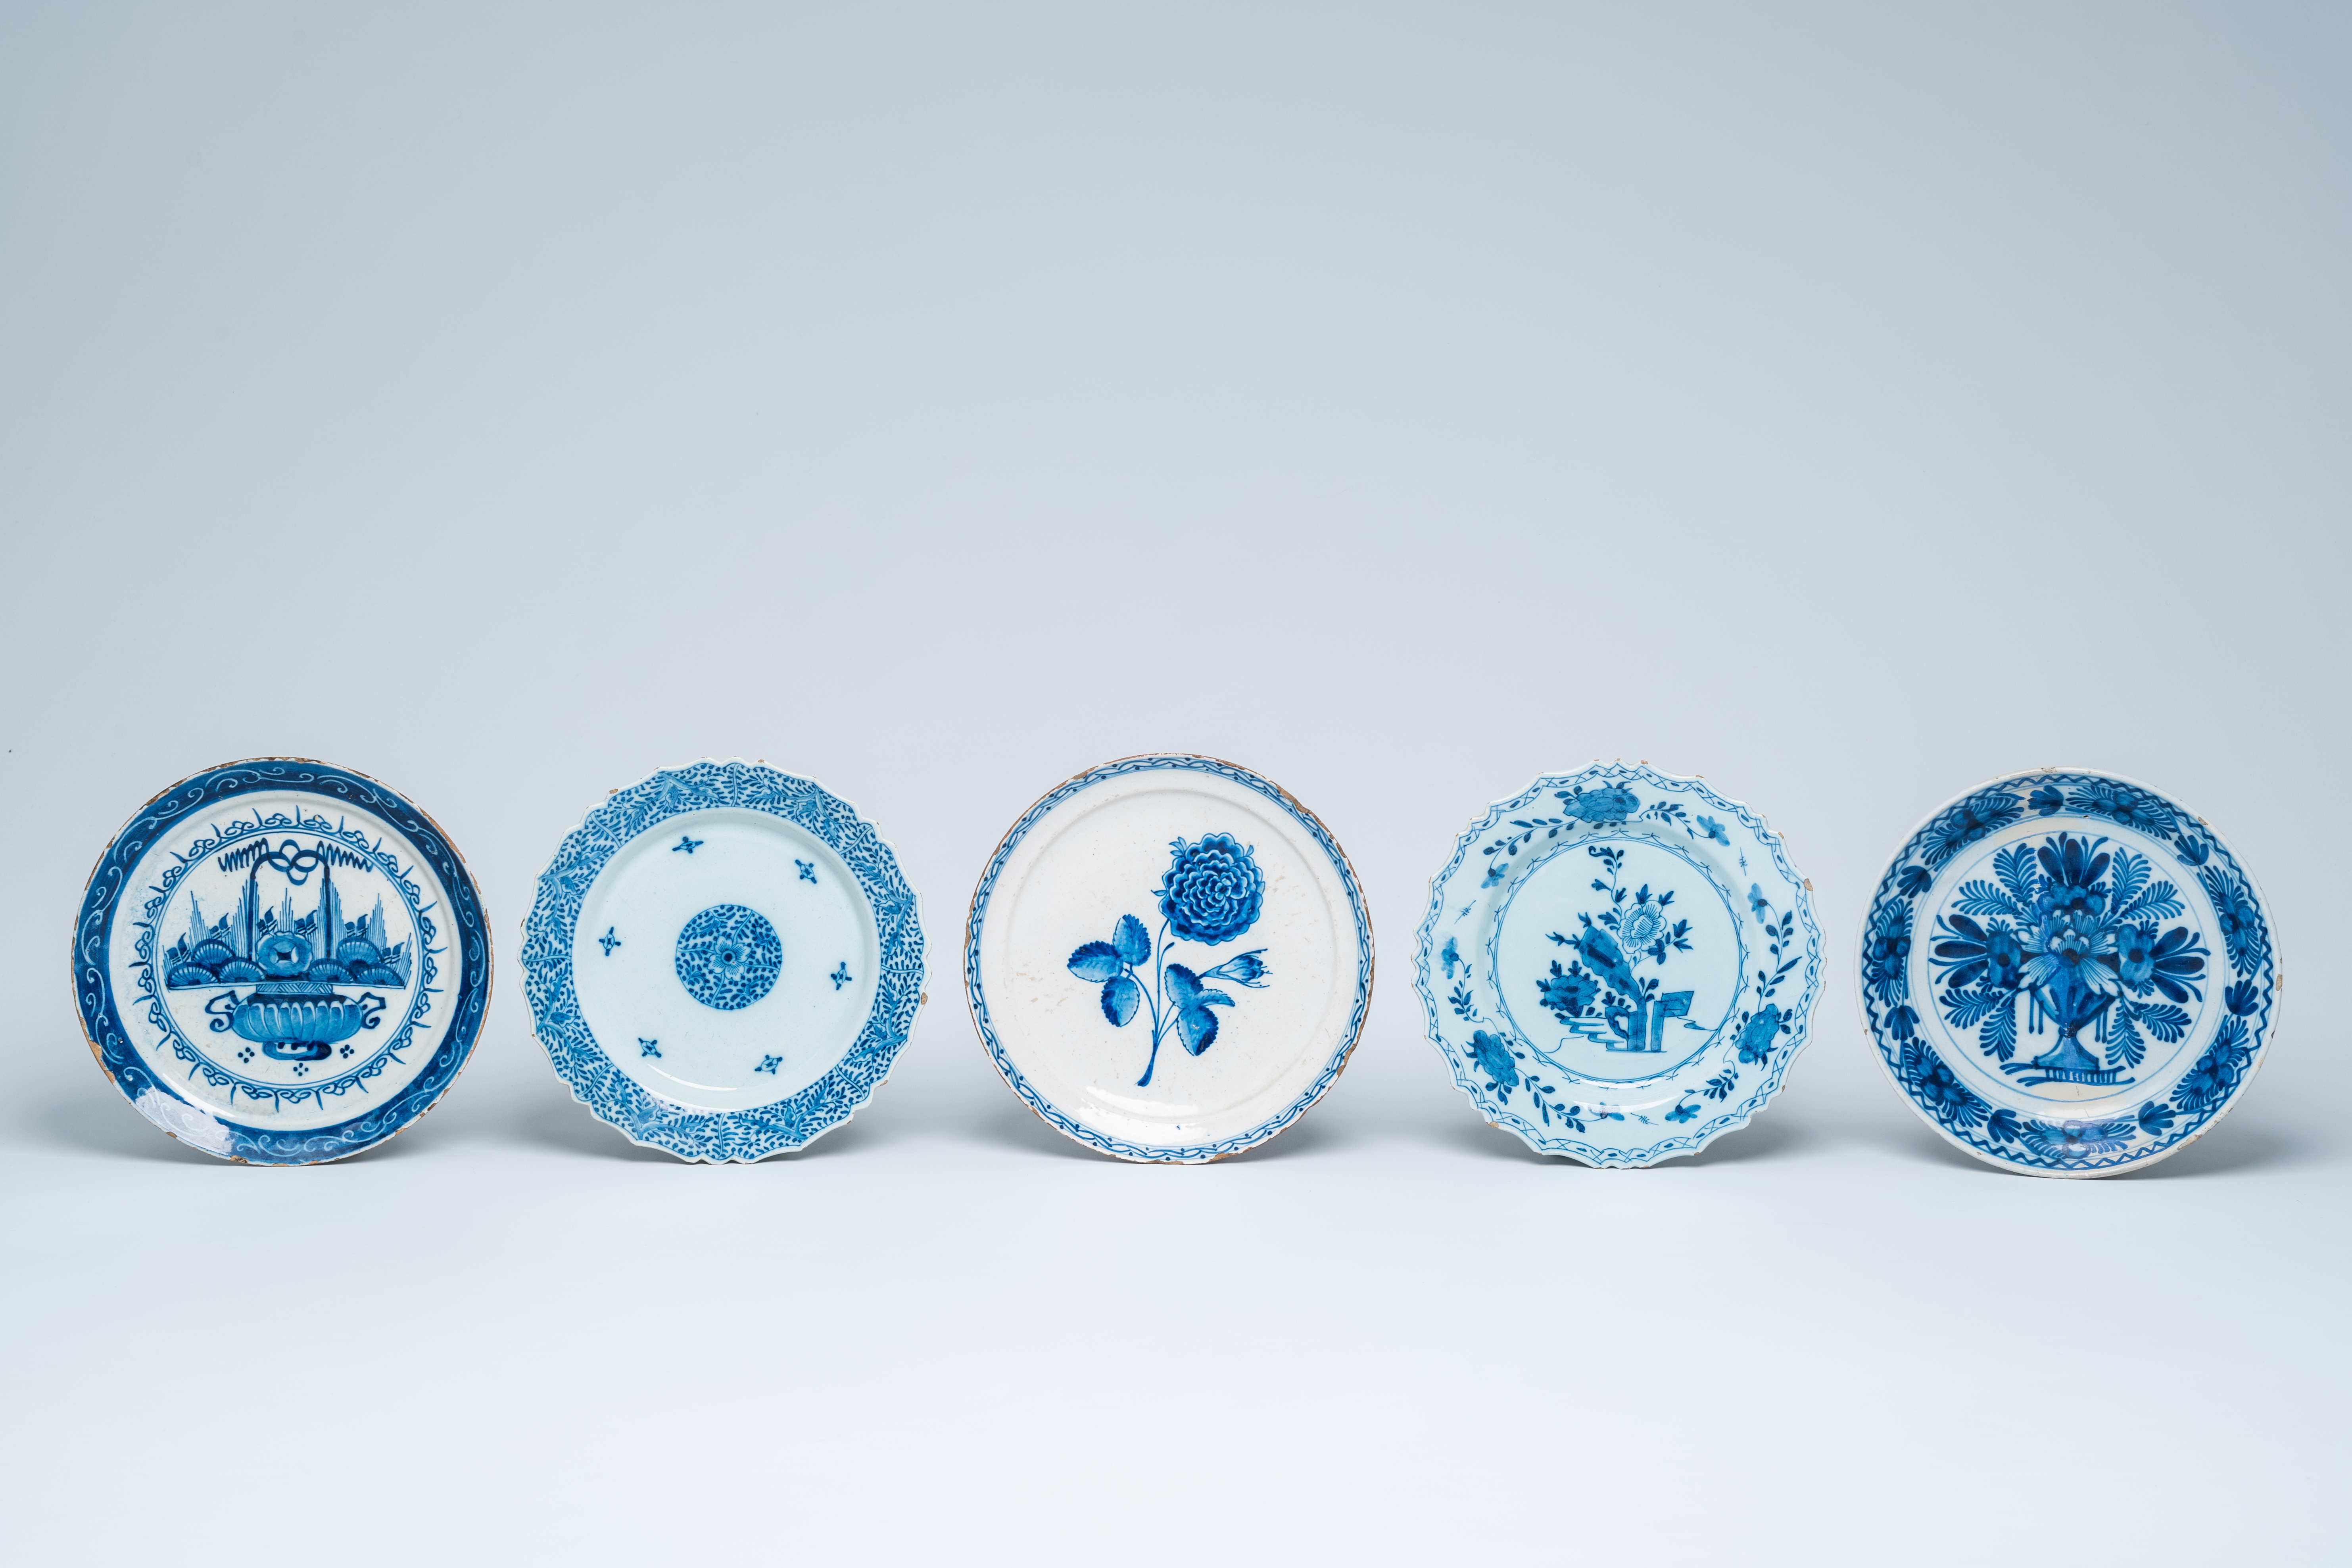 15 various blue, white and polychrome Dutch Delft plates, 18th C. - Image 6 of 7